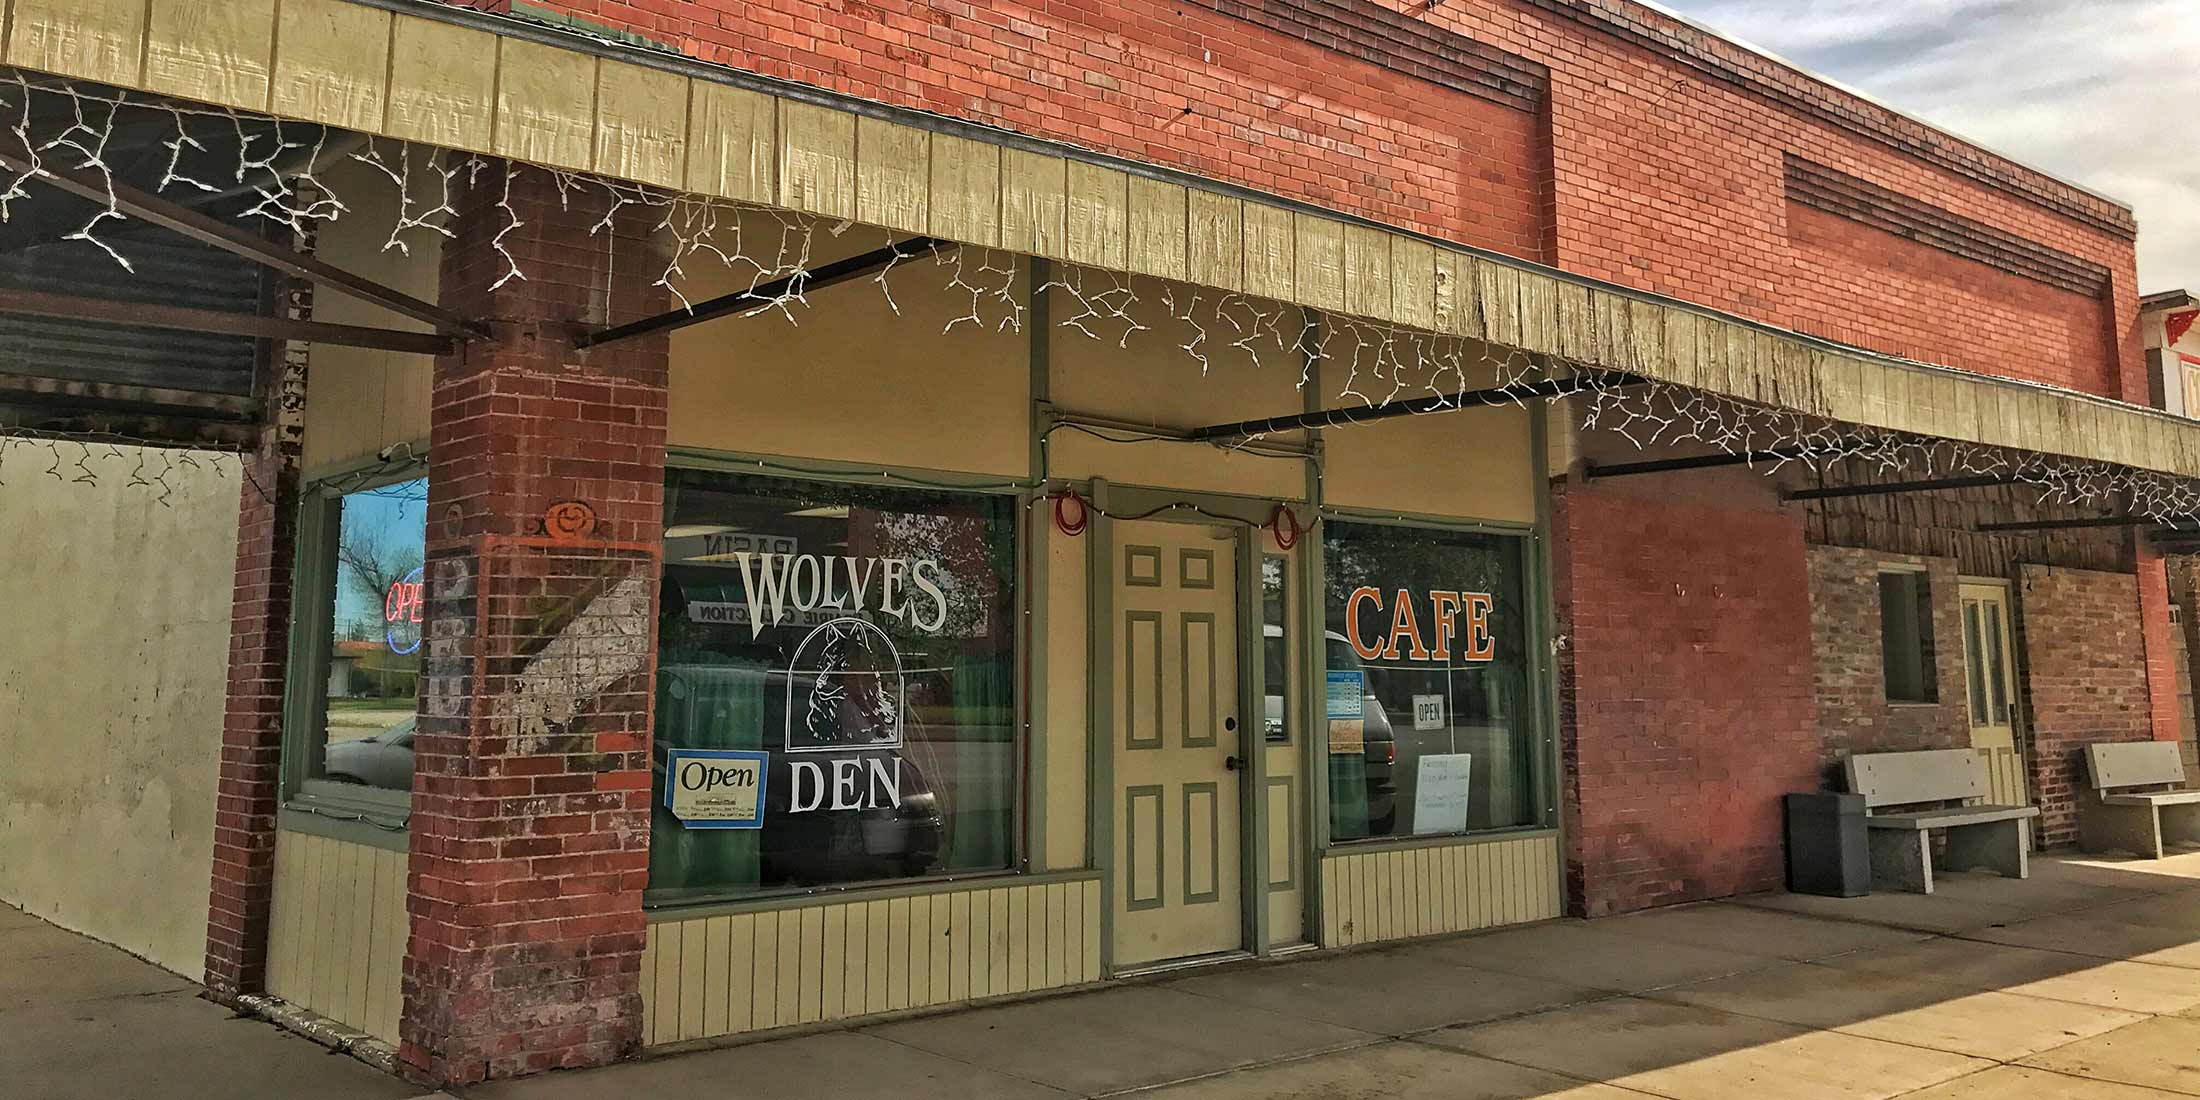 Information about the Wolves Den Cafe located in Stanford, Montana - Judith Bain County.